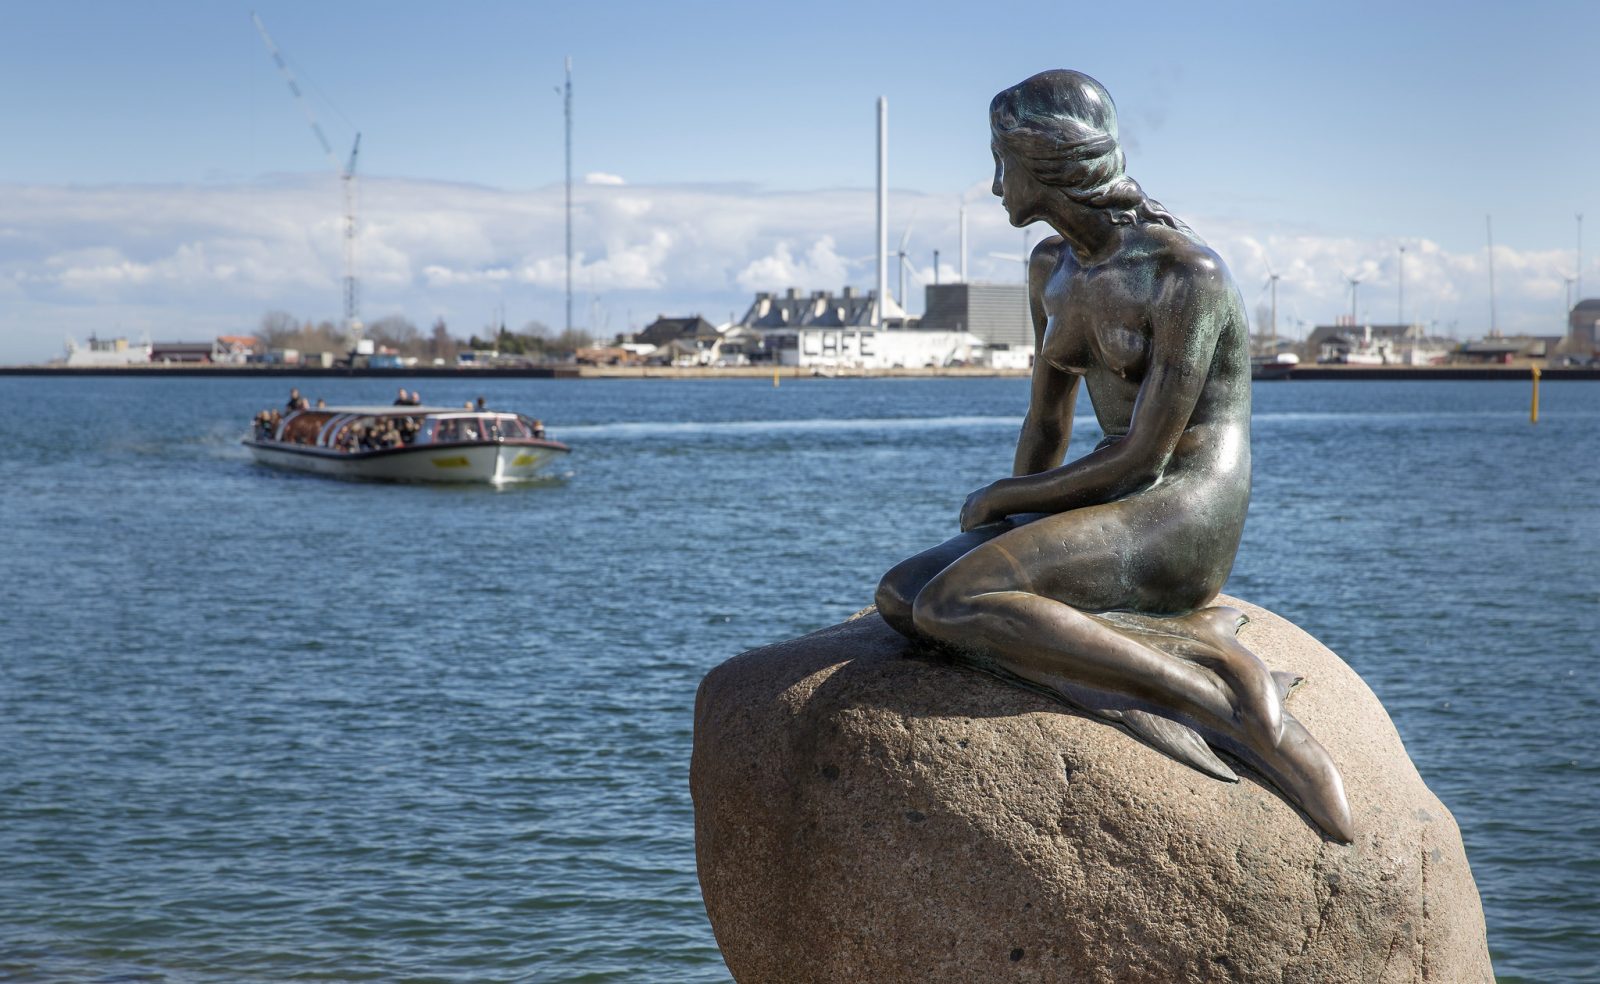 🏰 9 in 10 People Can’t Pass This General Knowledge Quiz on European Cities. Can You? The Little Mermaid Statue In Copenhagen, Denmark